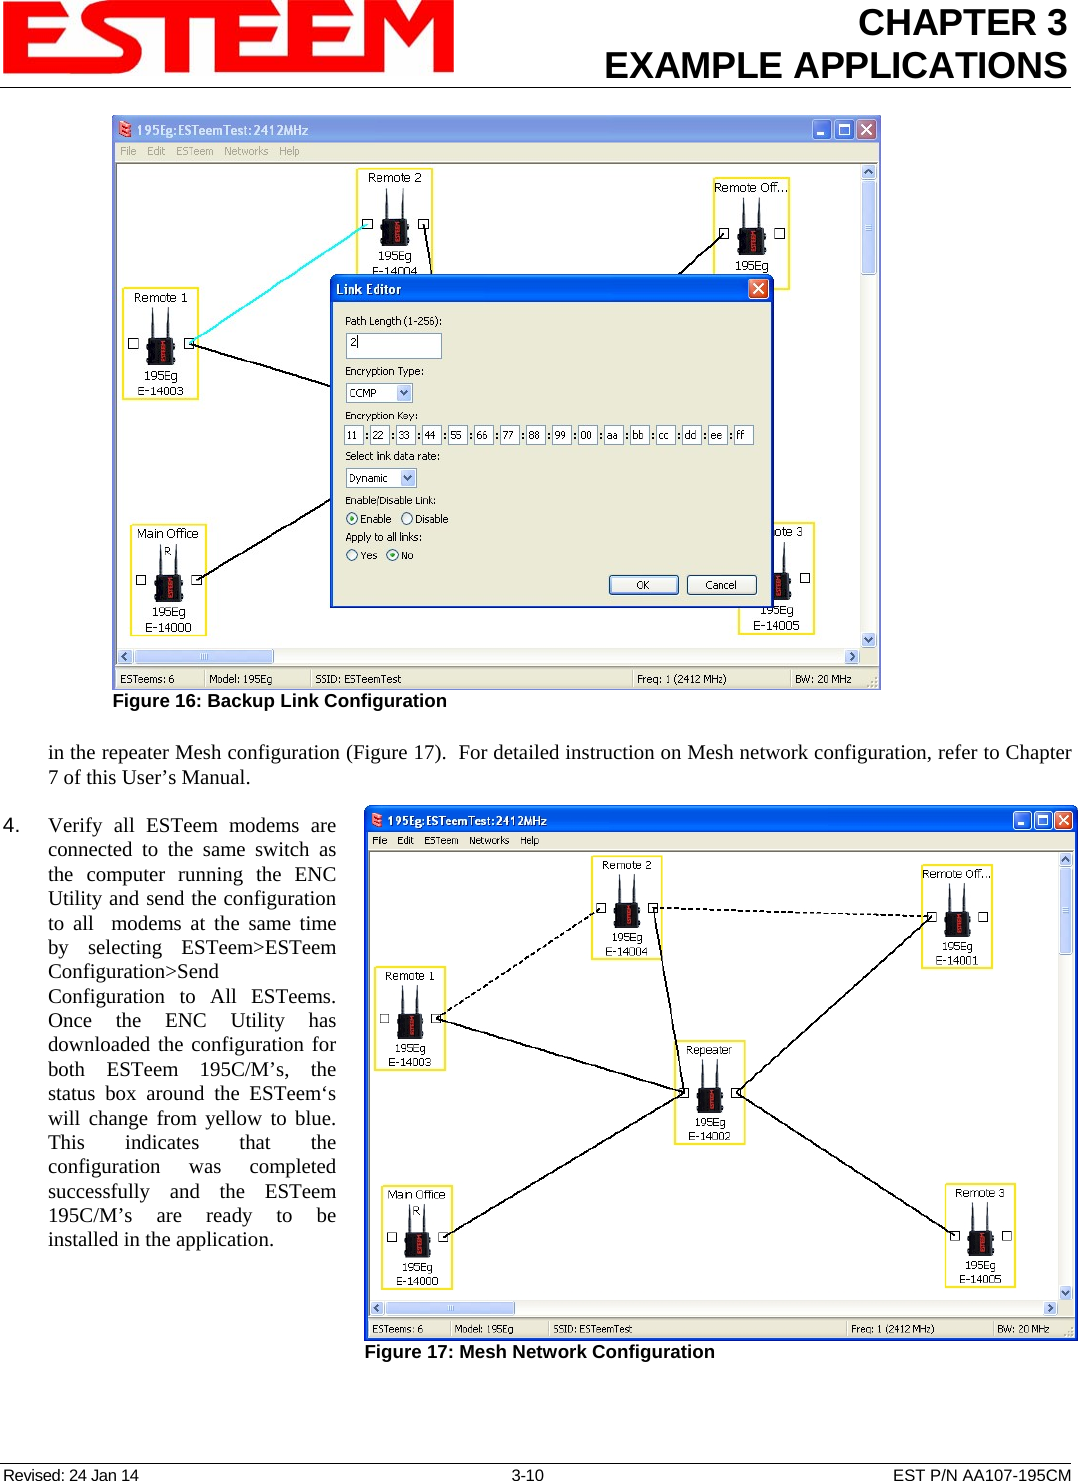 CHAPTER 3 EXAMPLE APPLICATIONS  in the repeater Mesh configuration (Figure 17).  For detailed instruction on Mesh network configuration, refer to Chapter 7 of this User’s Manual.  Figure 16: Backup Link Configuration   4.    Verify all ESTeem modems are connected to the same switch as the computer running the ENC Utility and send the configuration to all  modems at the same time by selecting ESTeem&gt;ESTeem Configuration&gt;Send Configuration to All ESTeems. Once the ENC Utility has downloaded the configuration for both ESTeem 195C/M’s, the status box around the ESTeem‘s will change from yellow to blue.  This indicates that the configuration was completed successfully and the ESTeem 195C/M’s are ready to be installed in the application.  Figure 17: Mesh Network Configuration  Revised: 24 Jan 14  3-10  EST P/N AA107-195CM 